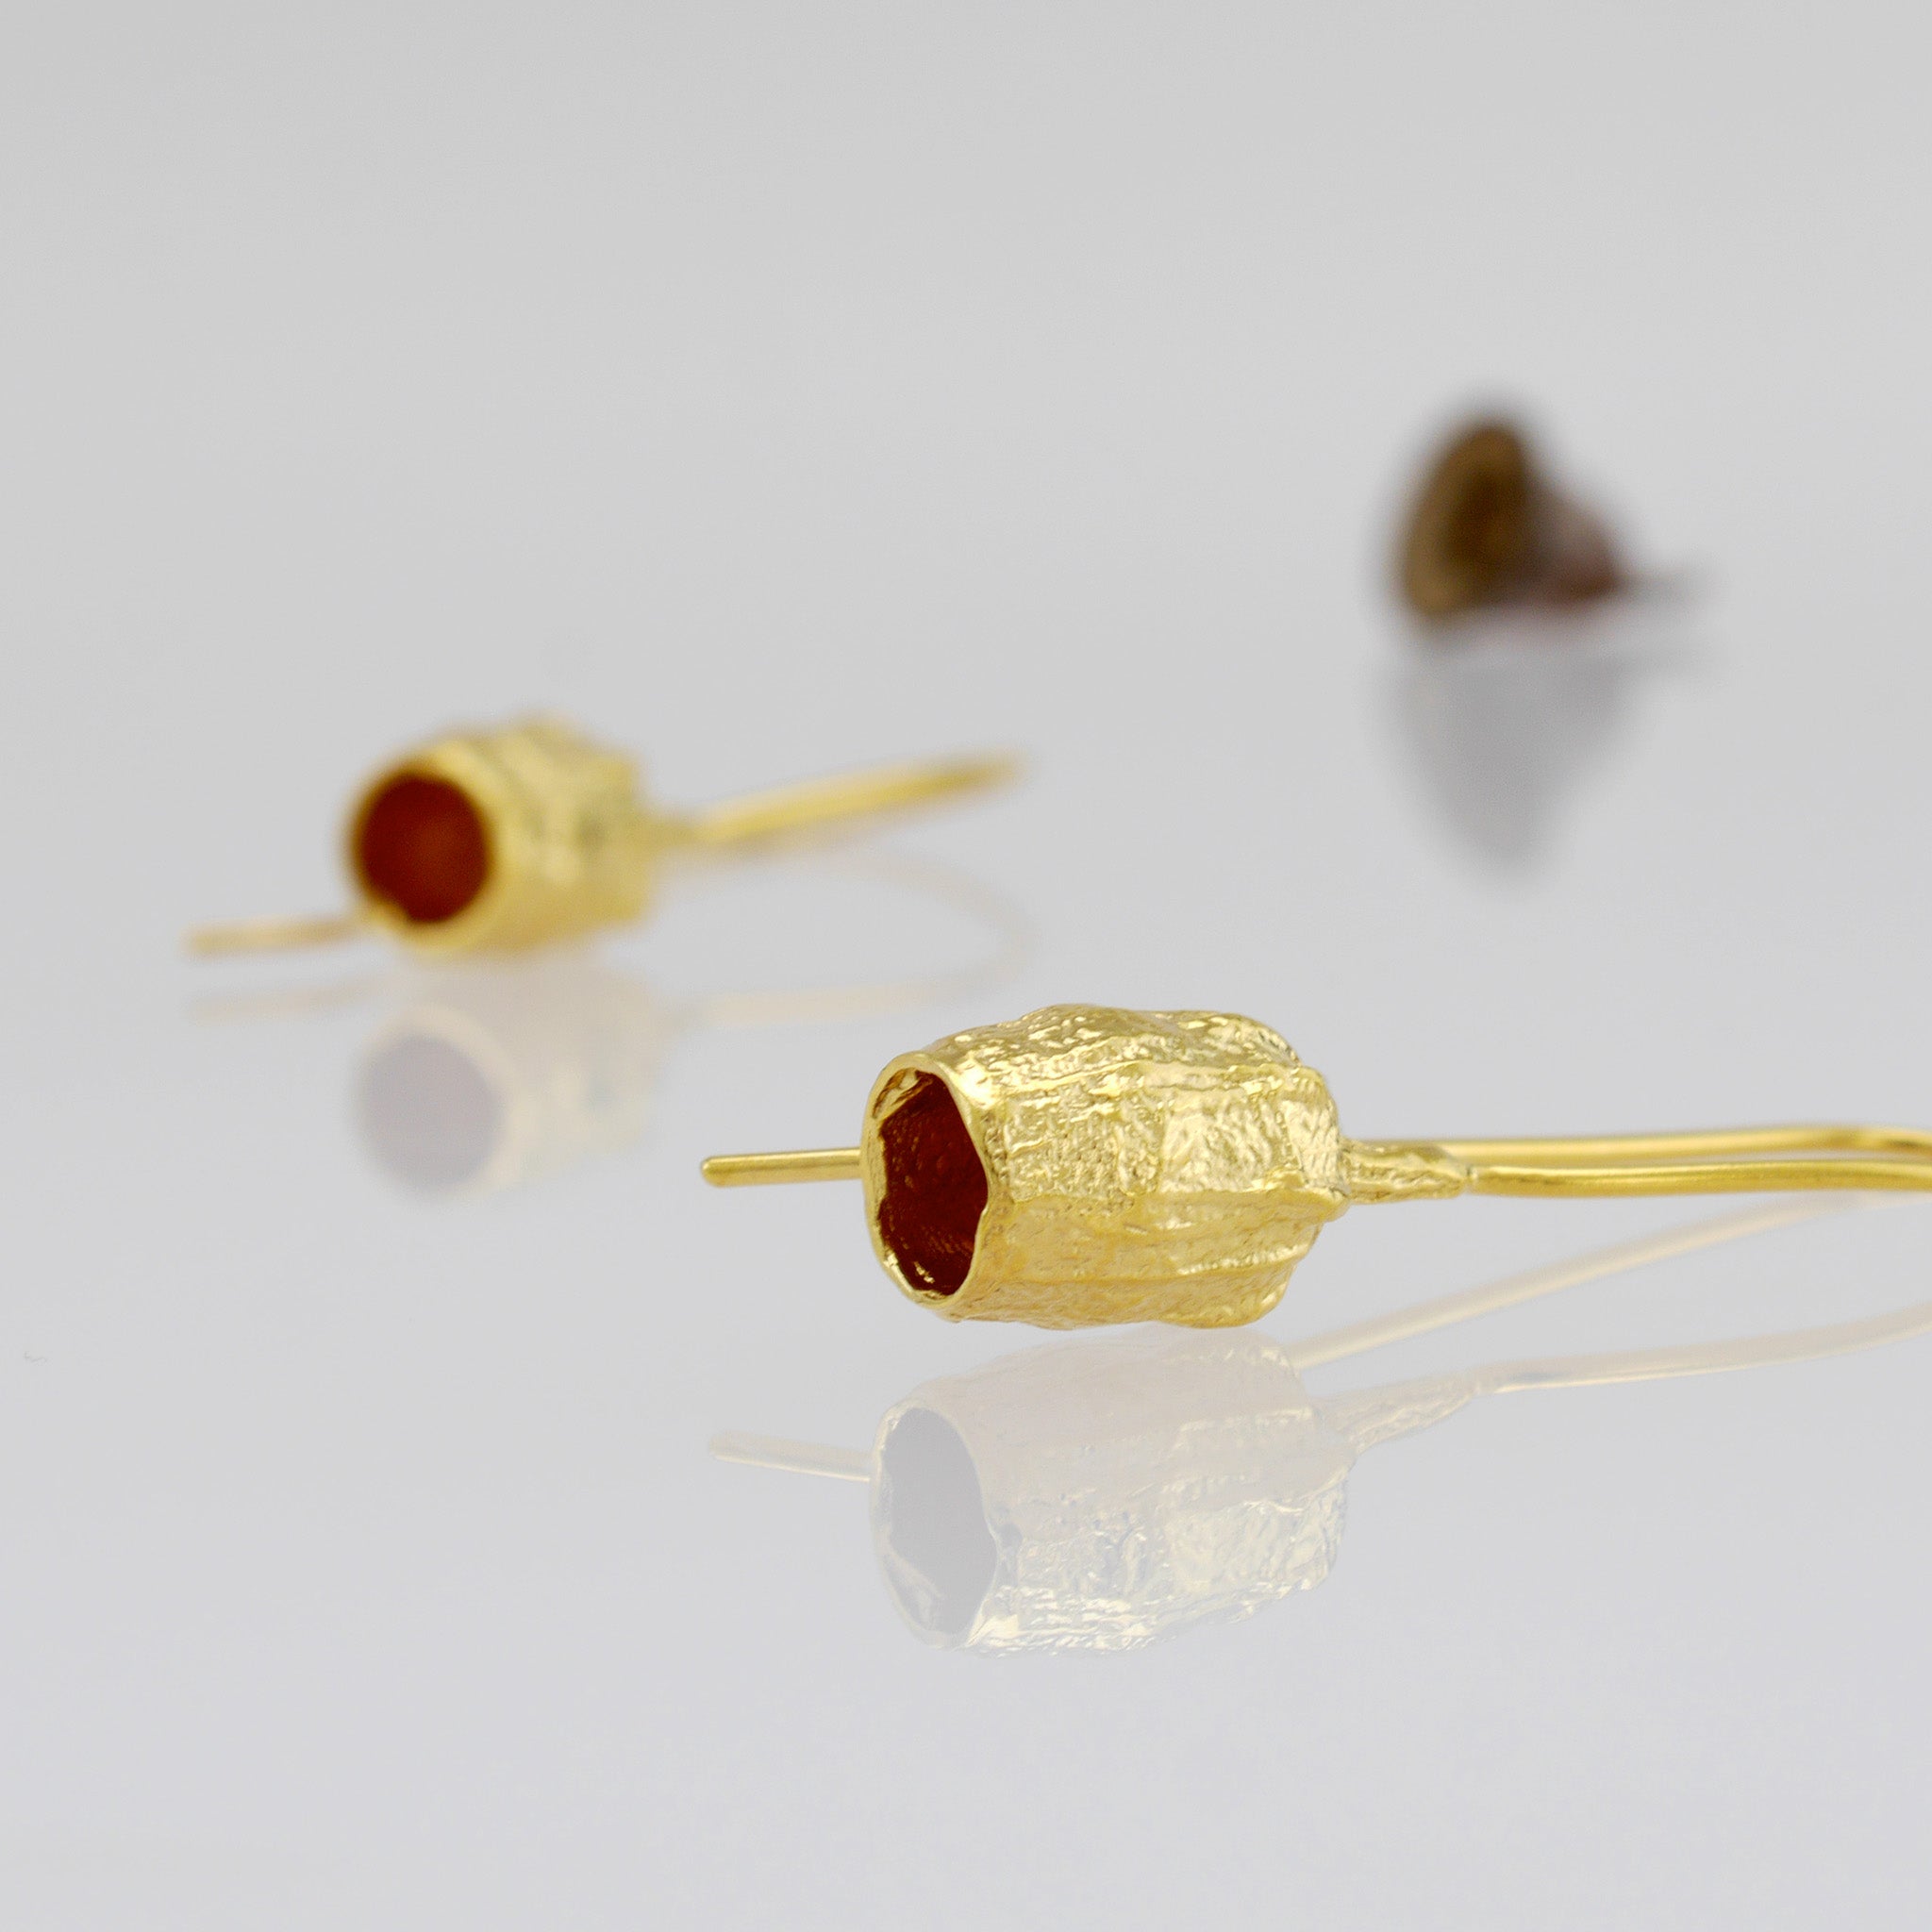 Gold drop earrings featuring a bell-shaped seed, which is a replica of a dried seed collected from nature.